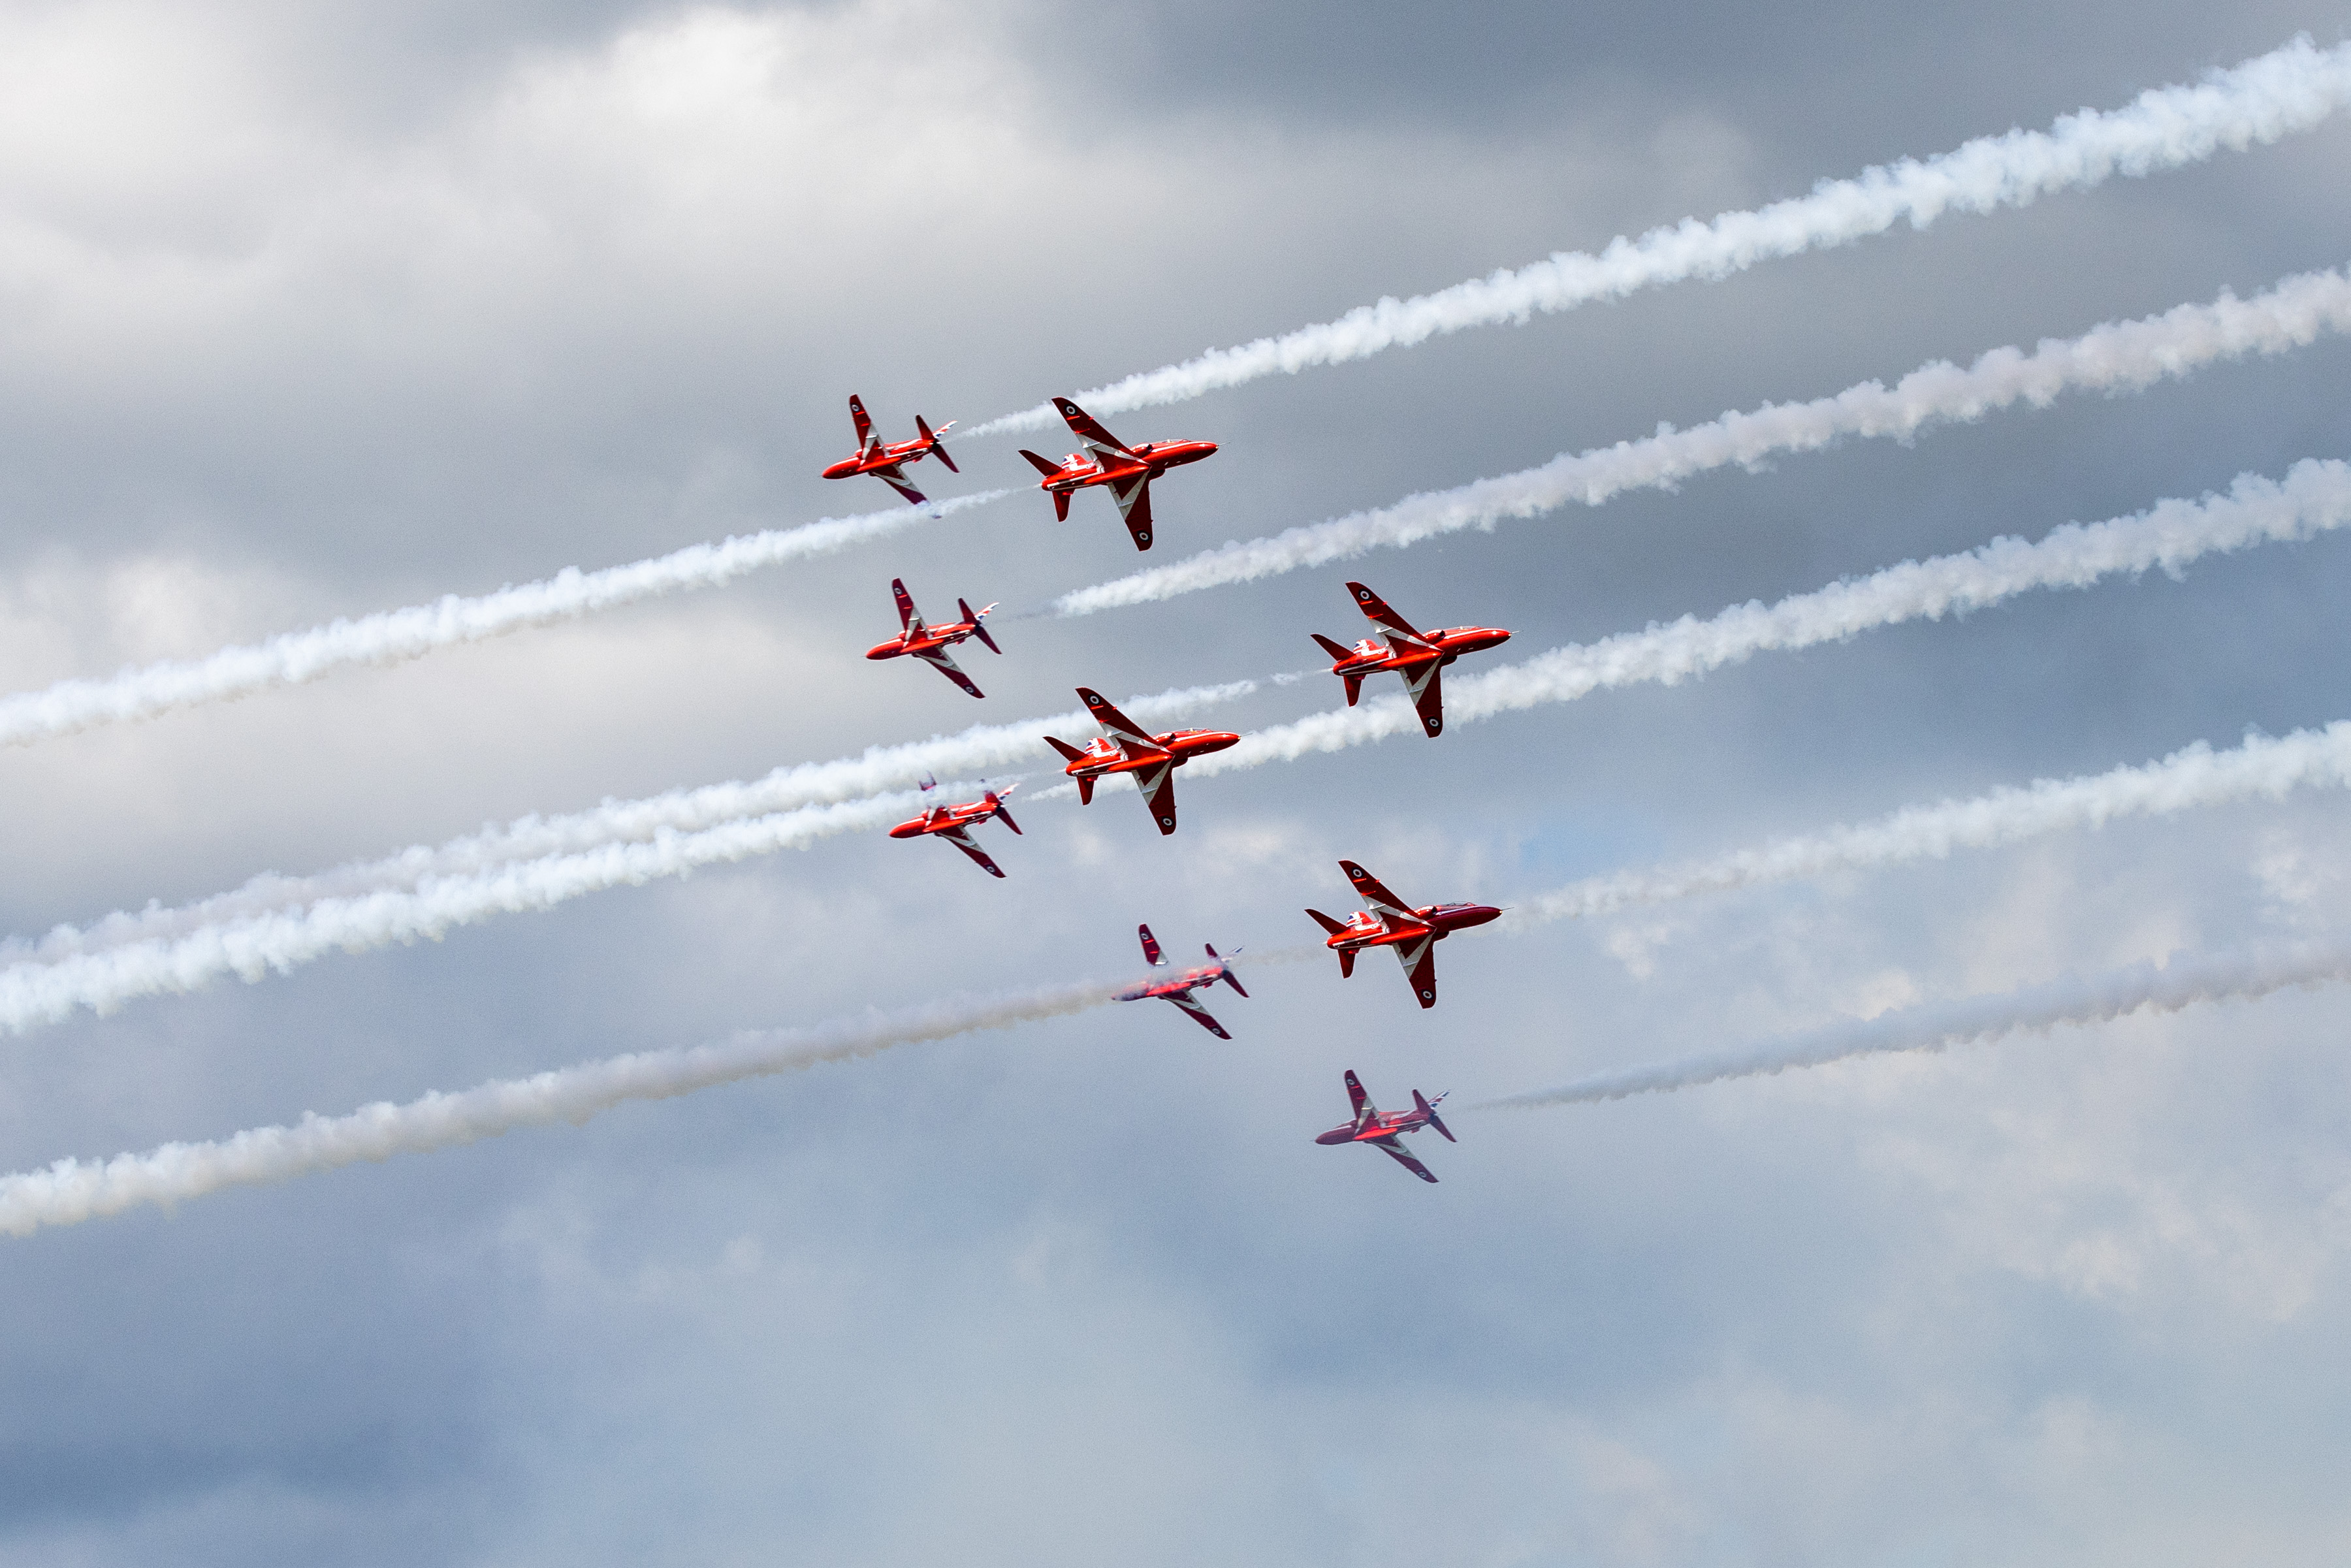 The 5/4 Split - not seen for more than a decade in a Red Arrows show.